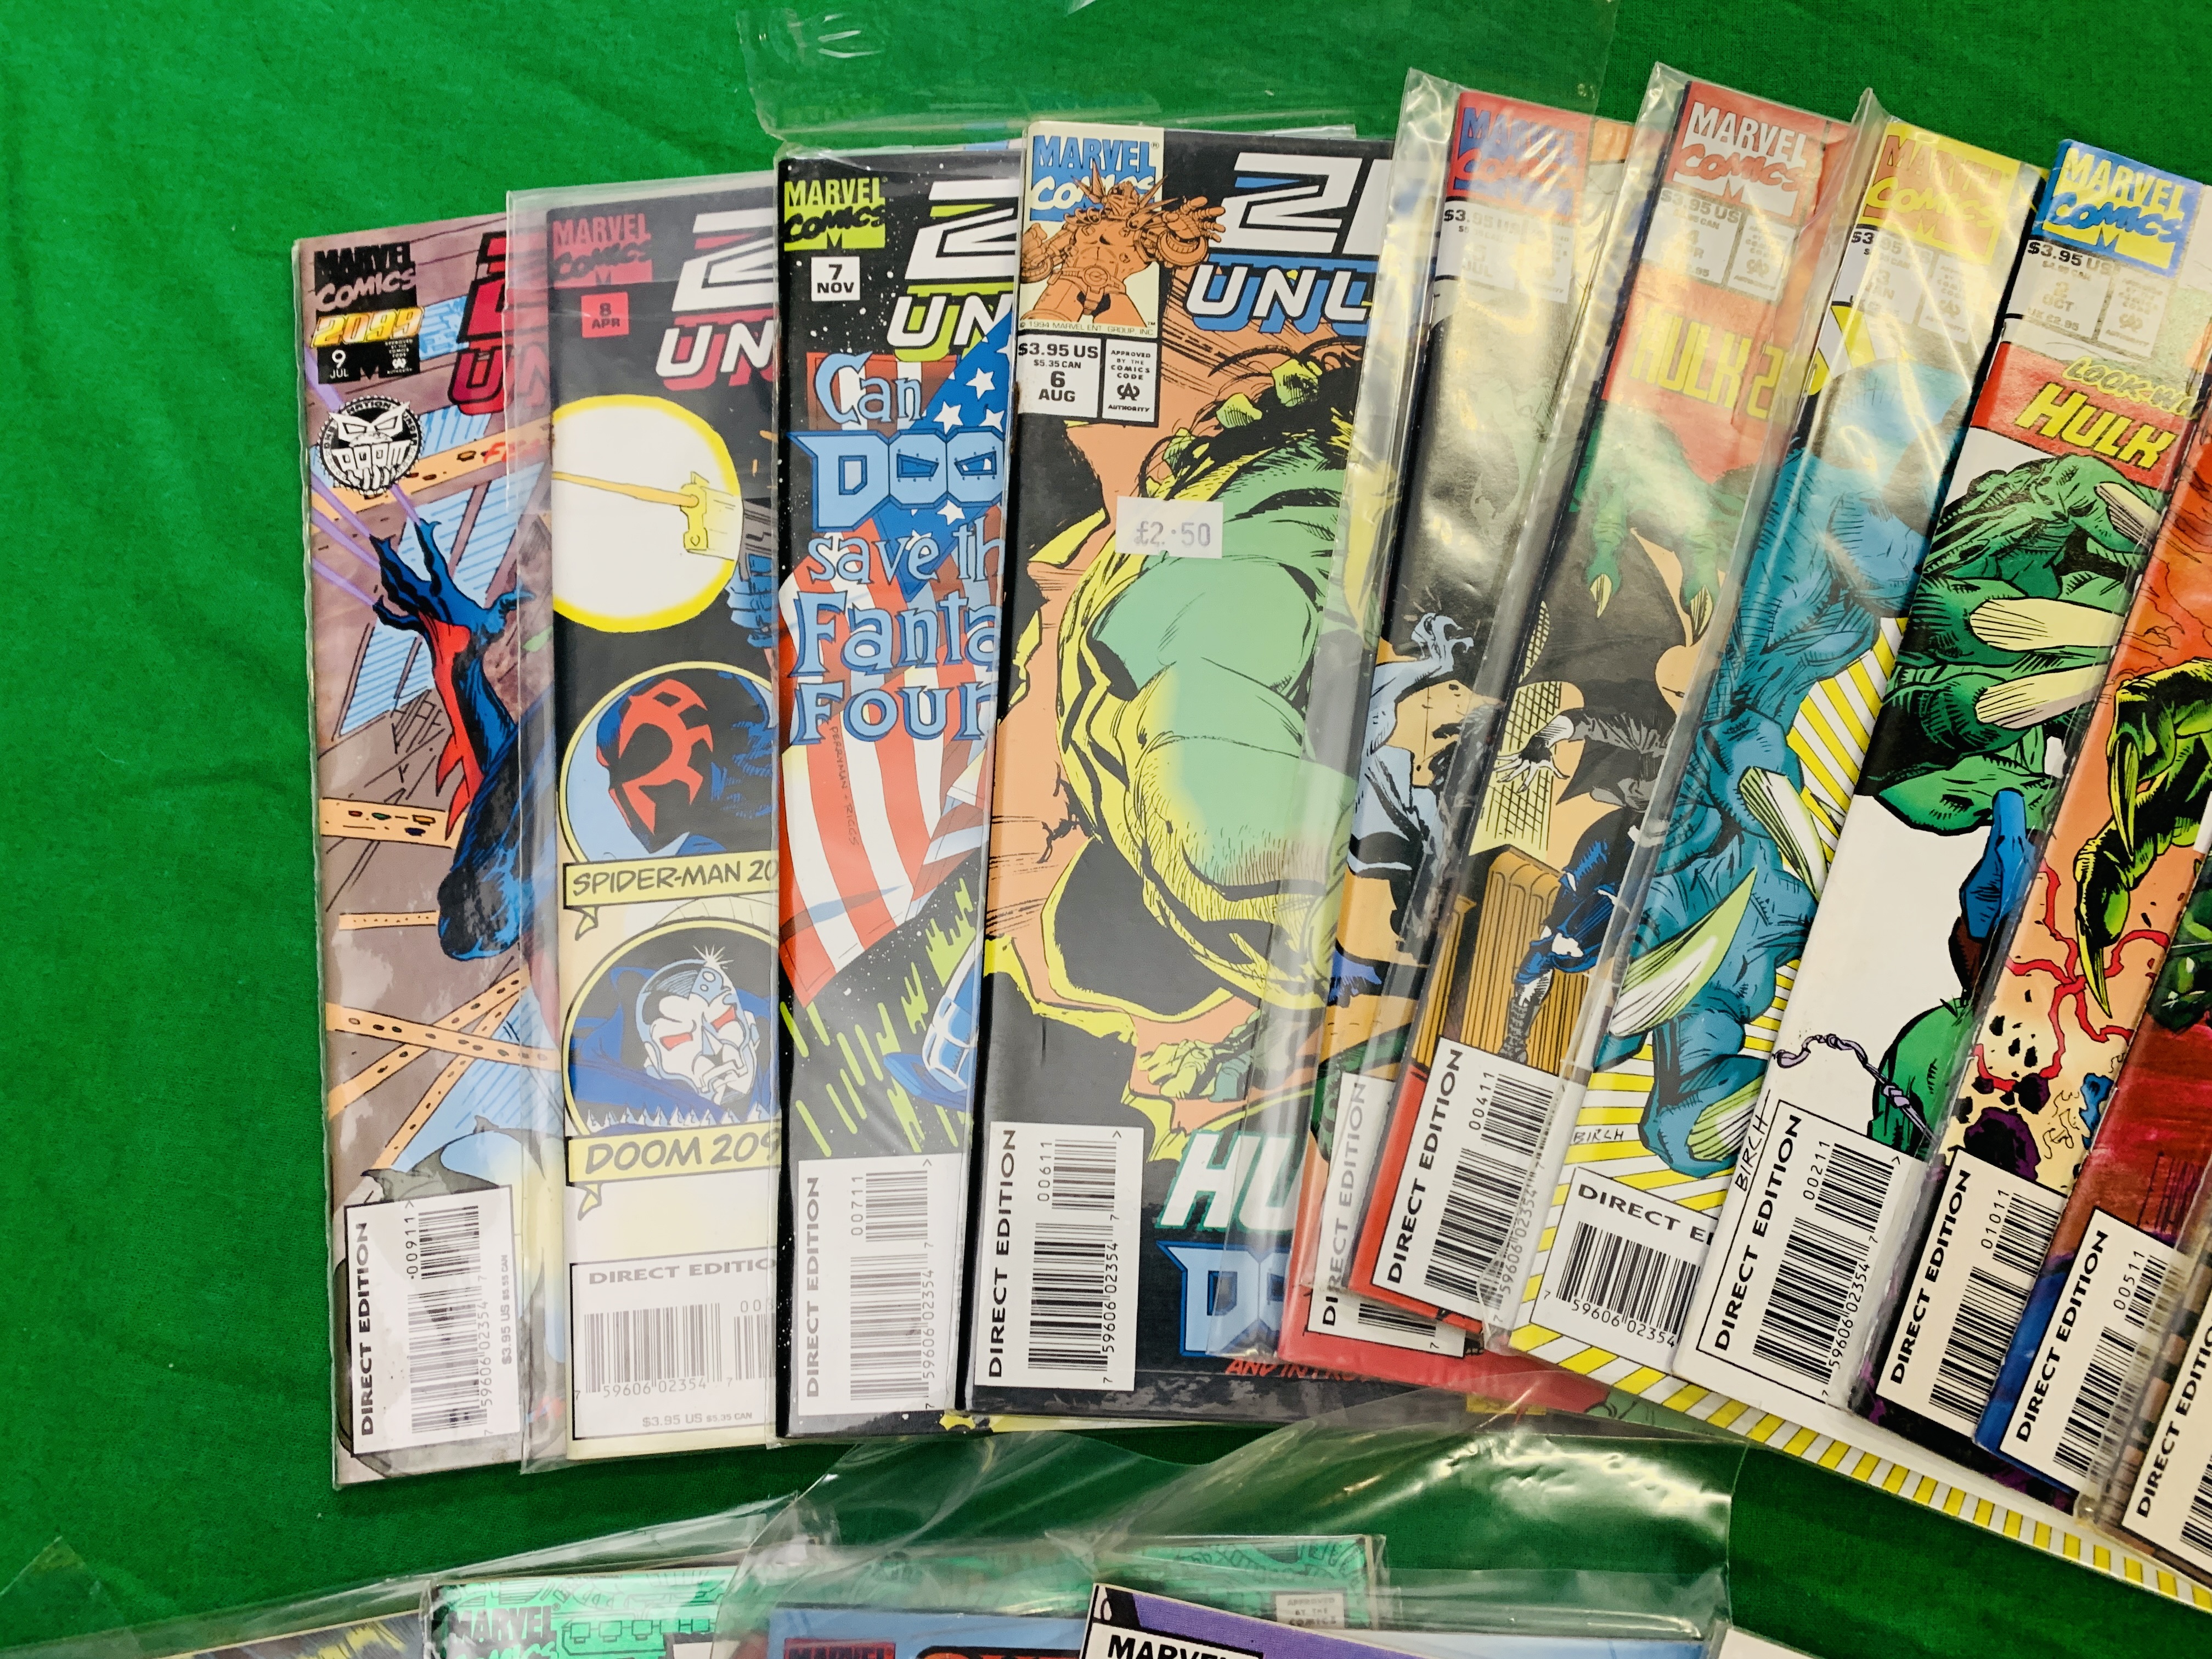 COLLECTION OF HULK MARVEL COMICS: HULK 2099 NO. 1 - 5, 10 FROM 1994. NO. 2 - 4 HAVE RUSTY STAPLES. - Image 5 of 5